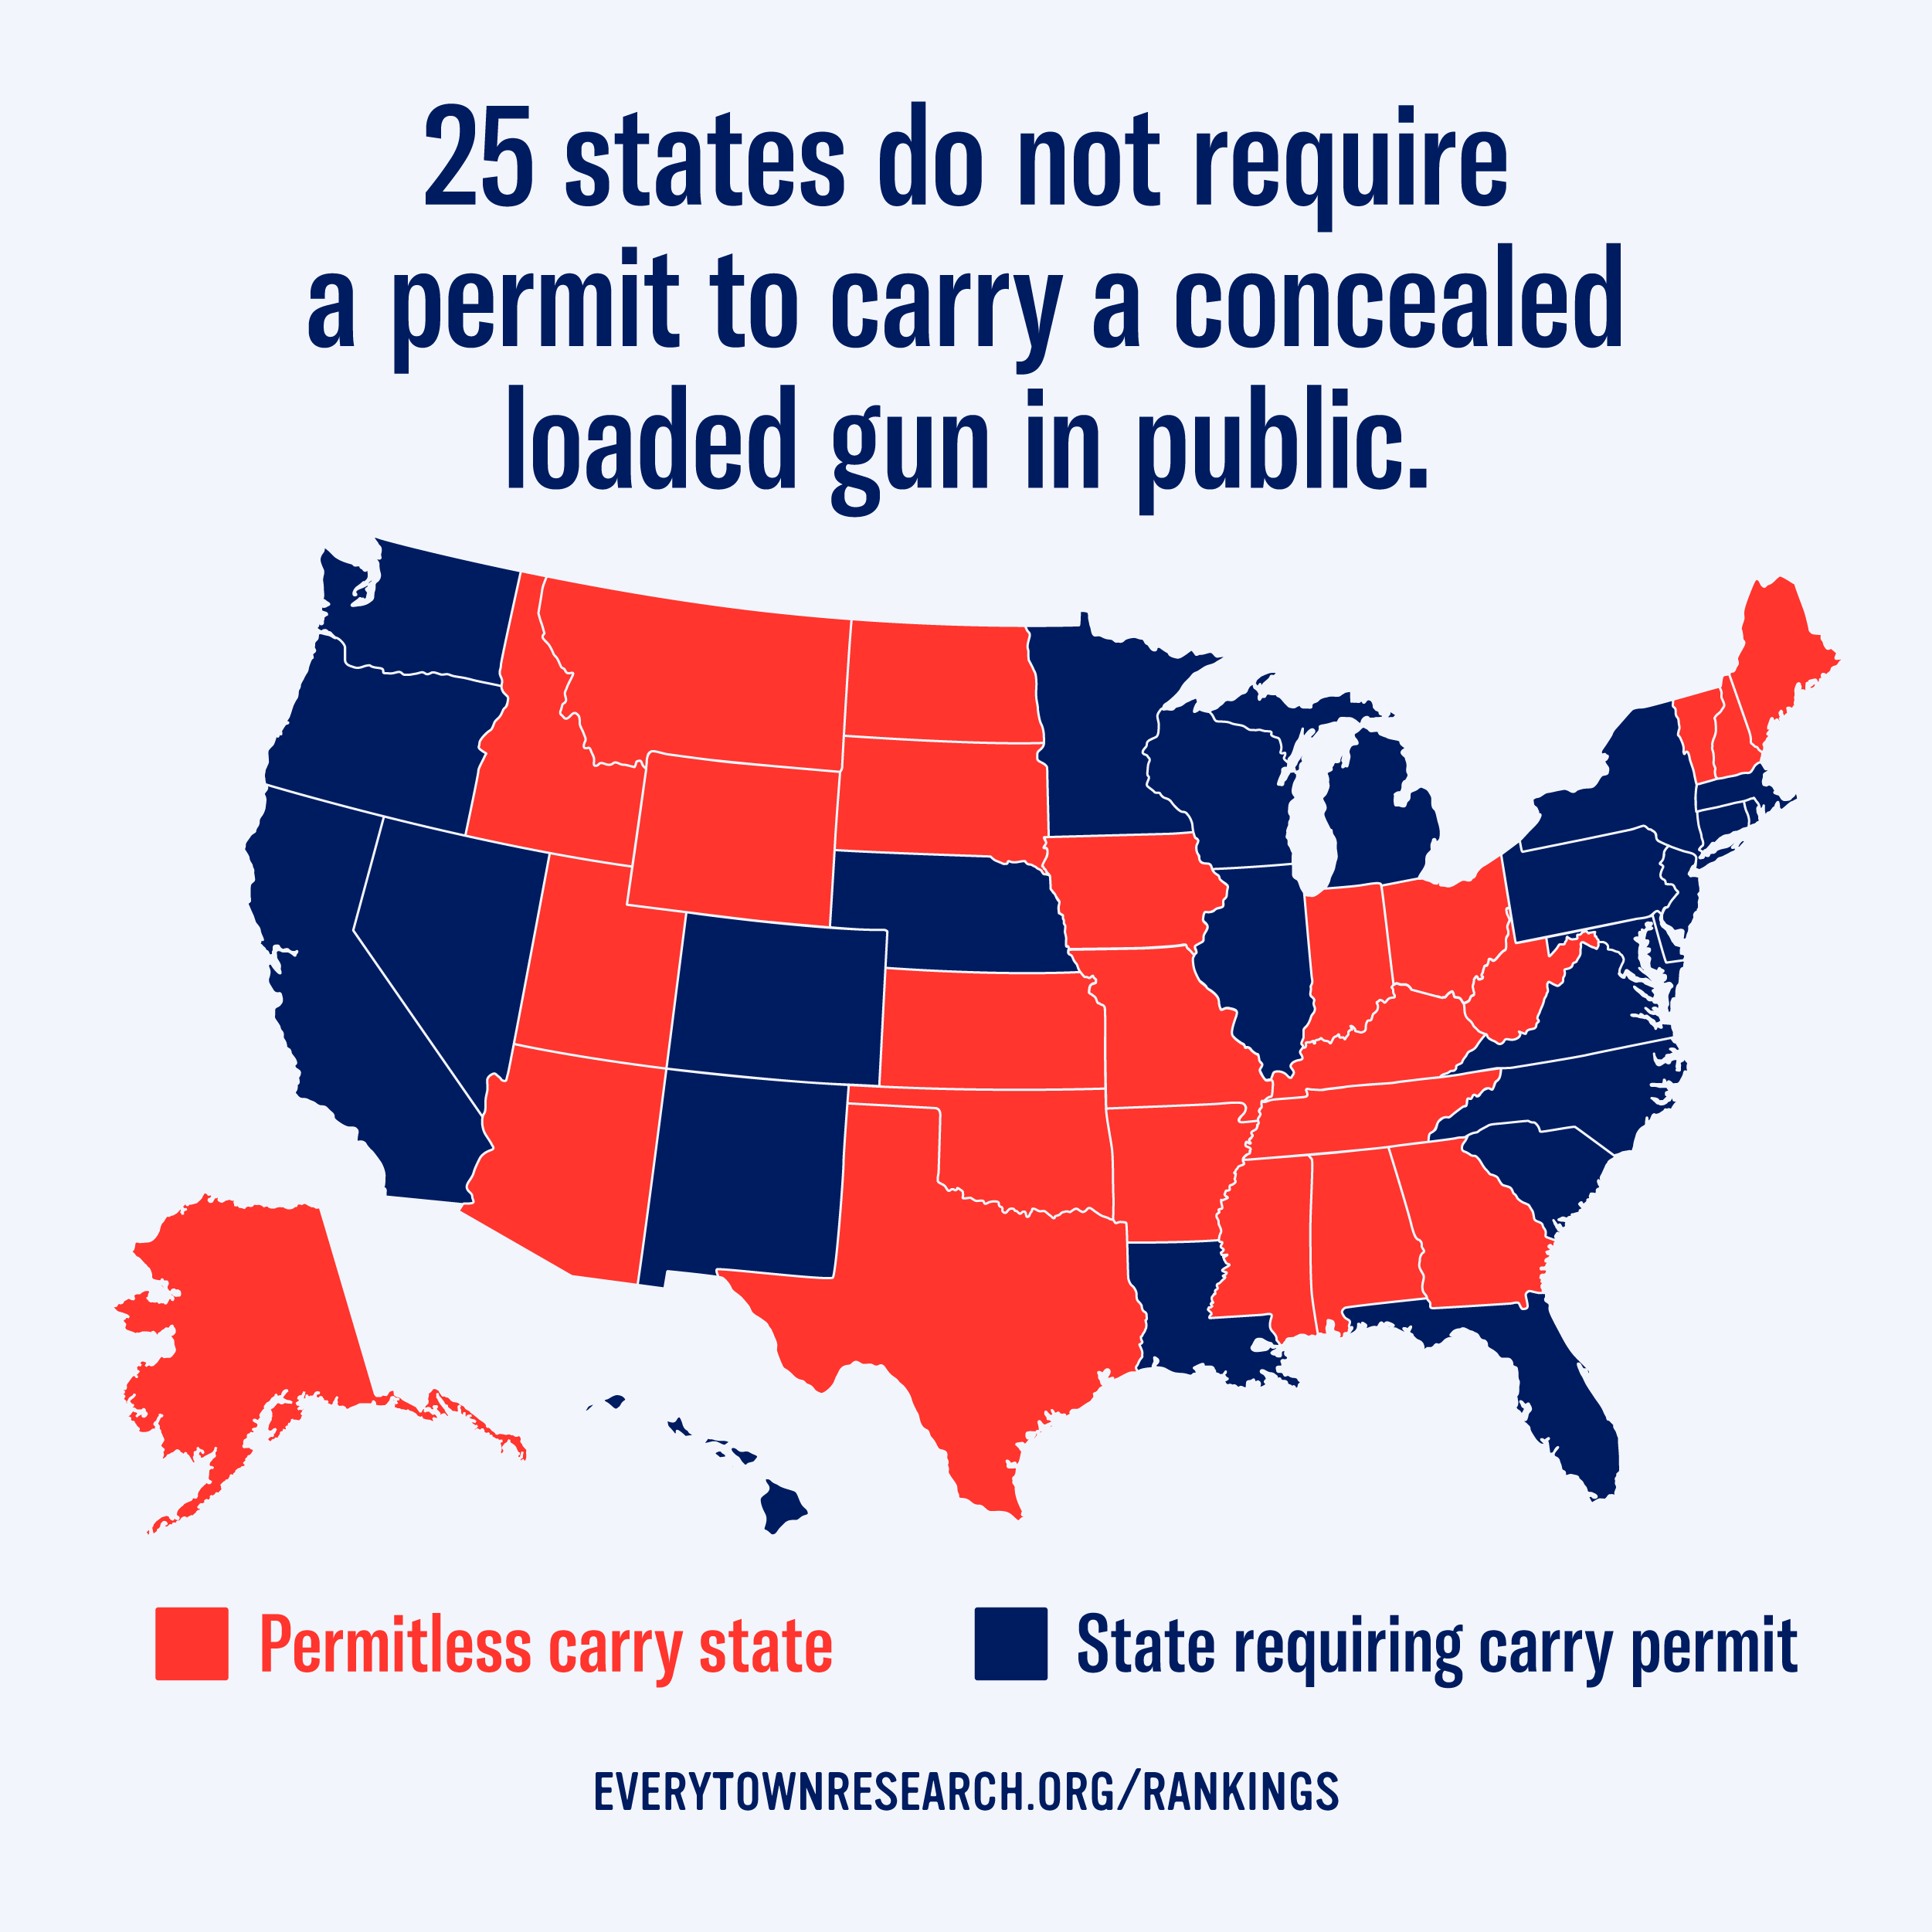 Permitless Carry States vs. States Requiring Permit